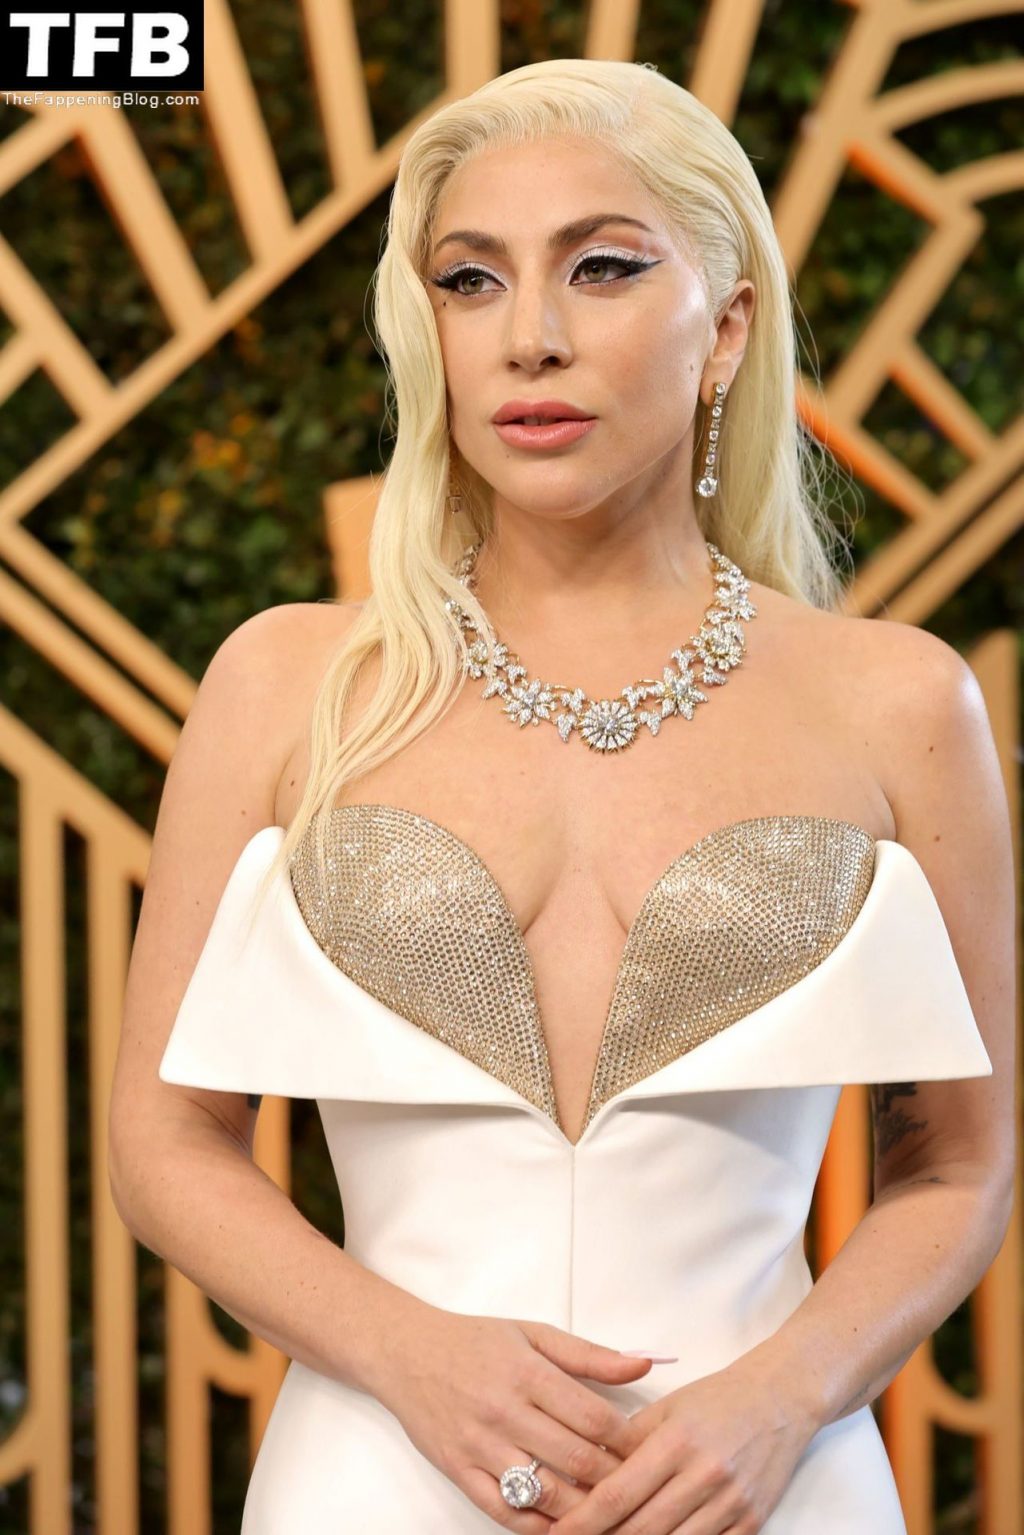 Lady Gaga Sexy The Fappening Blog 44 1024x1535 - Lady Gaga Flaunts Her Tits at the 28th Annual Screen Actors Guild Awards (70 Photos)